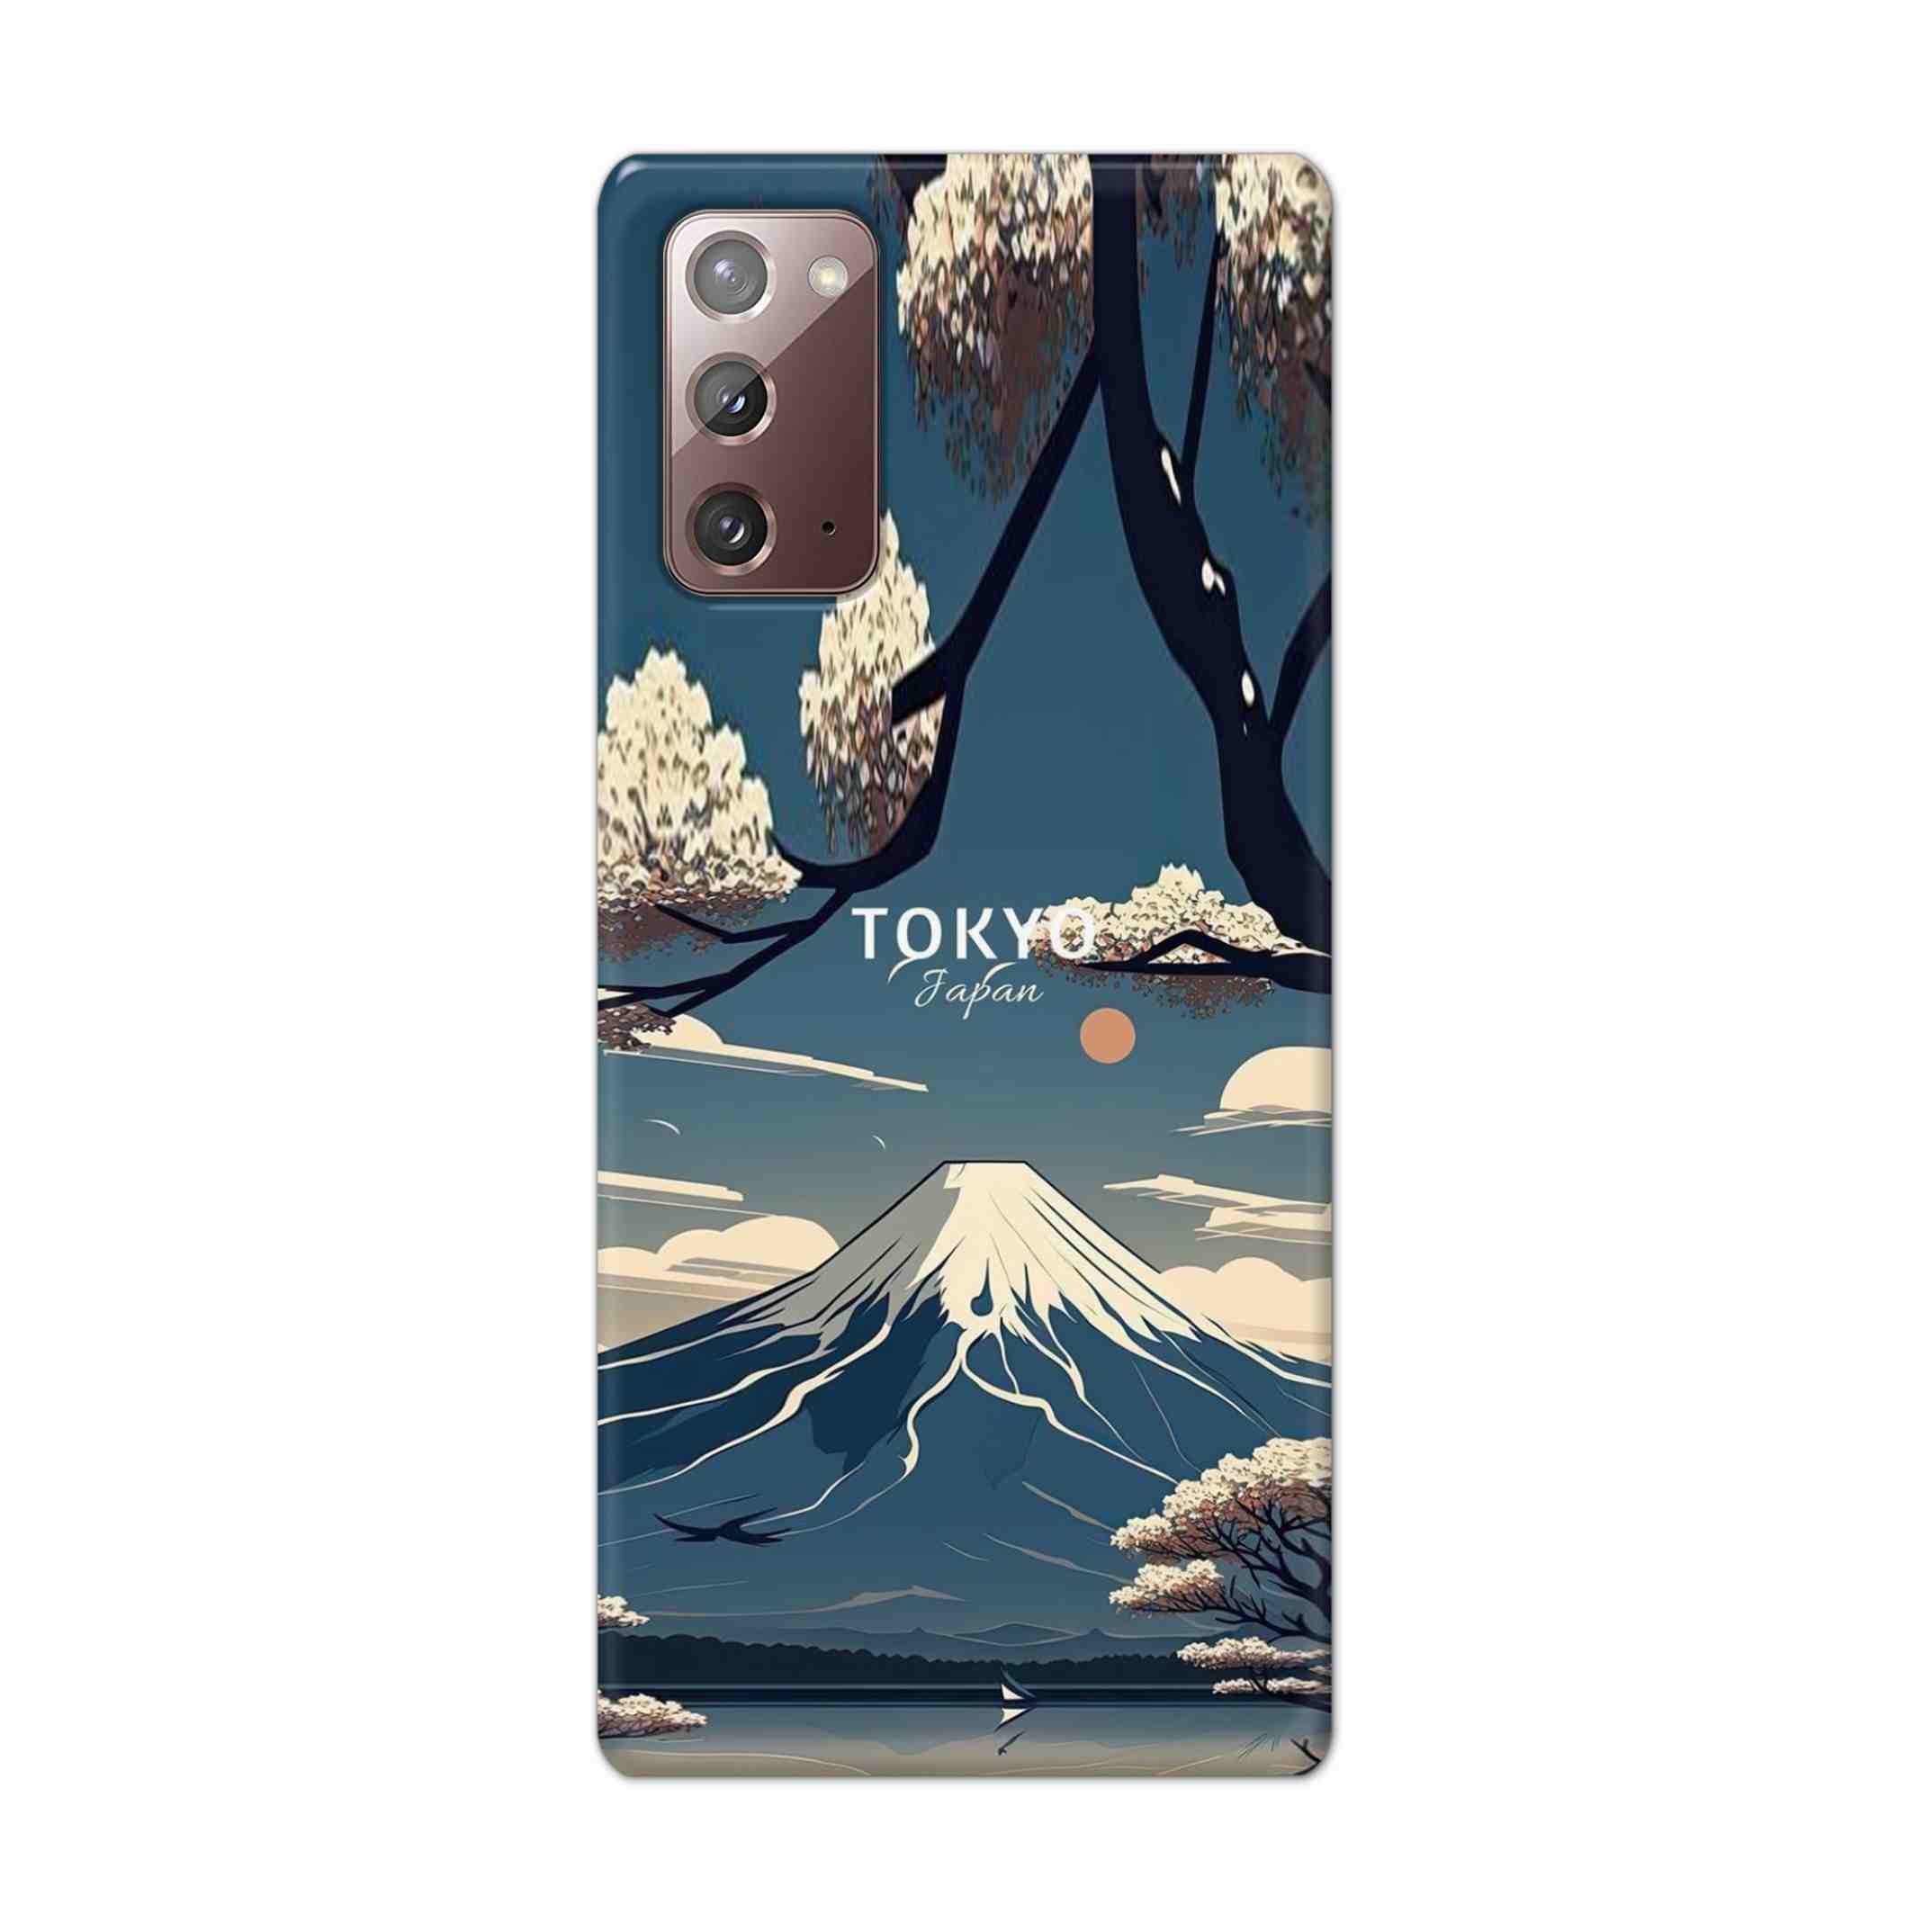 Buy Tokyo Hard Back Mobile Phone Case Cover For Samsung Galaxy Note 20 Online